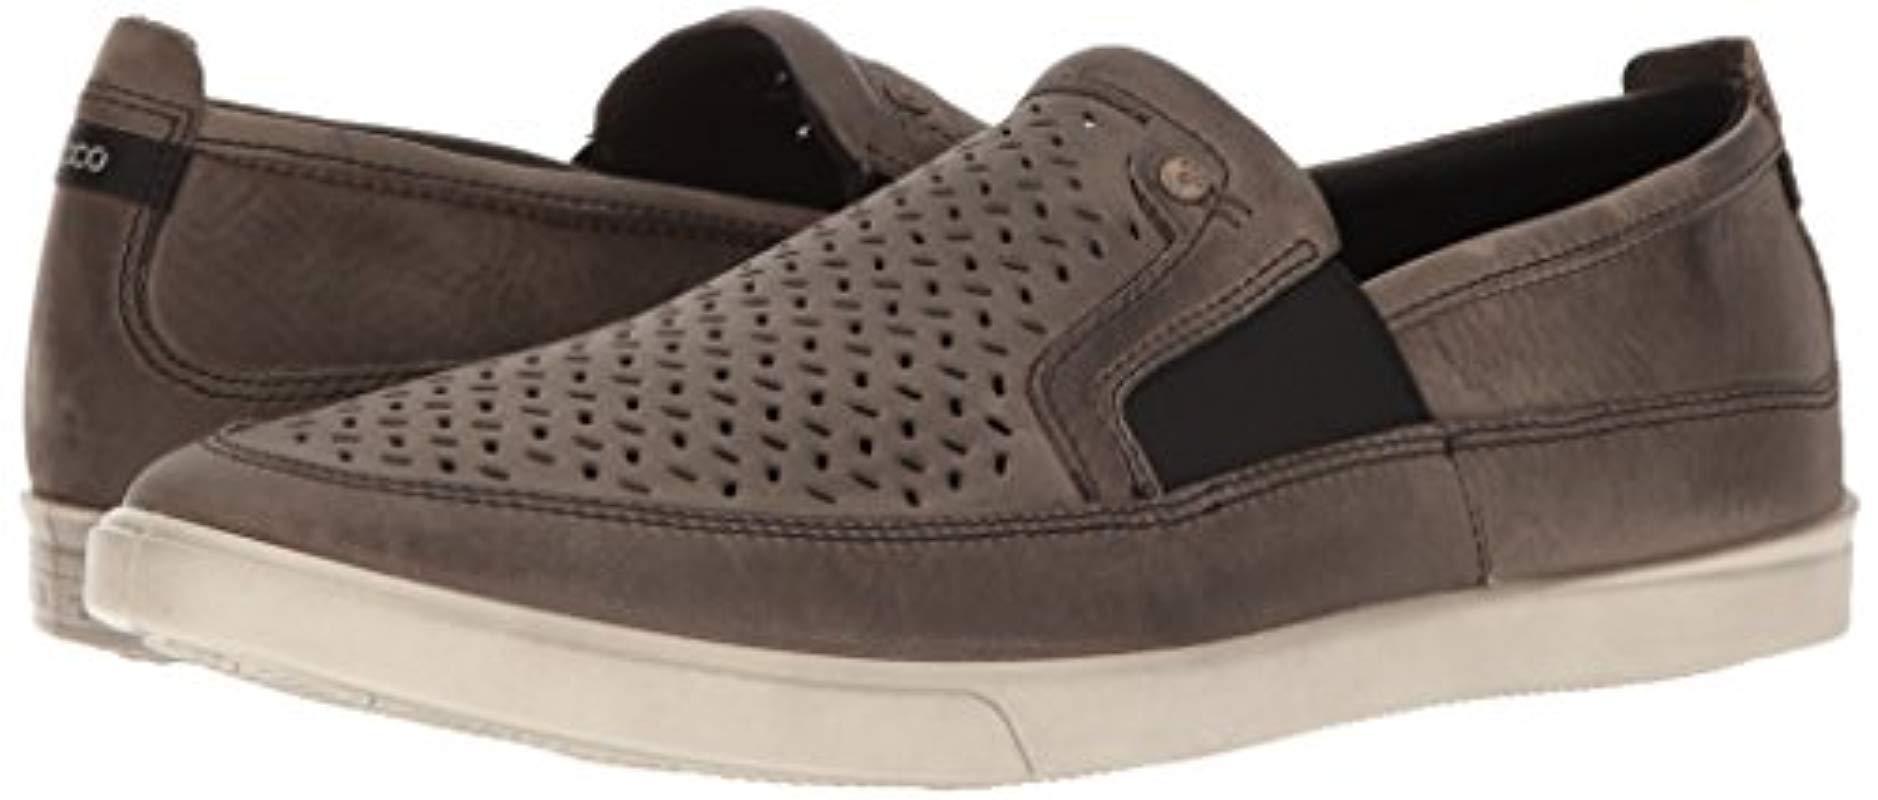 Ecco Leather Collin Perforated Slip On 